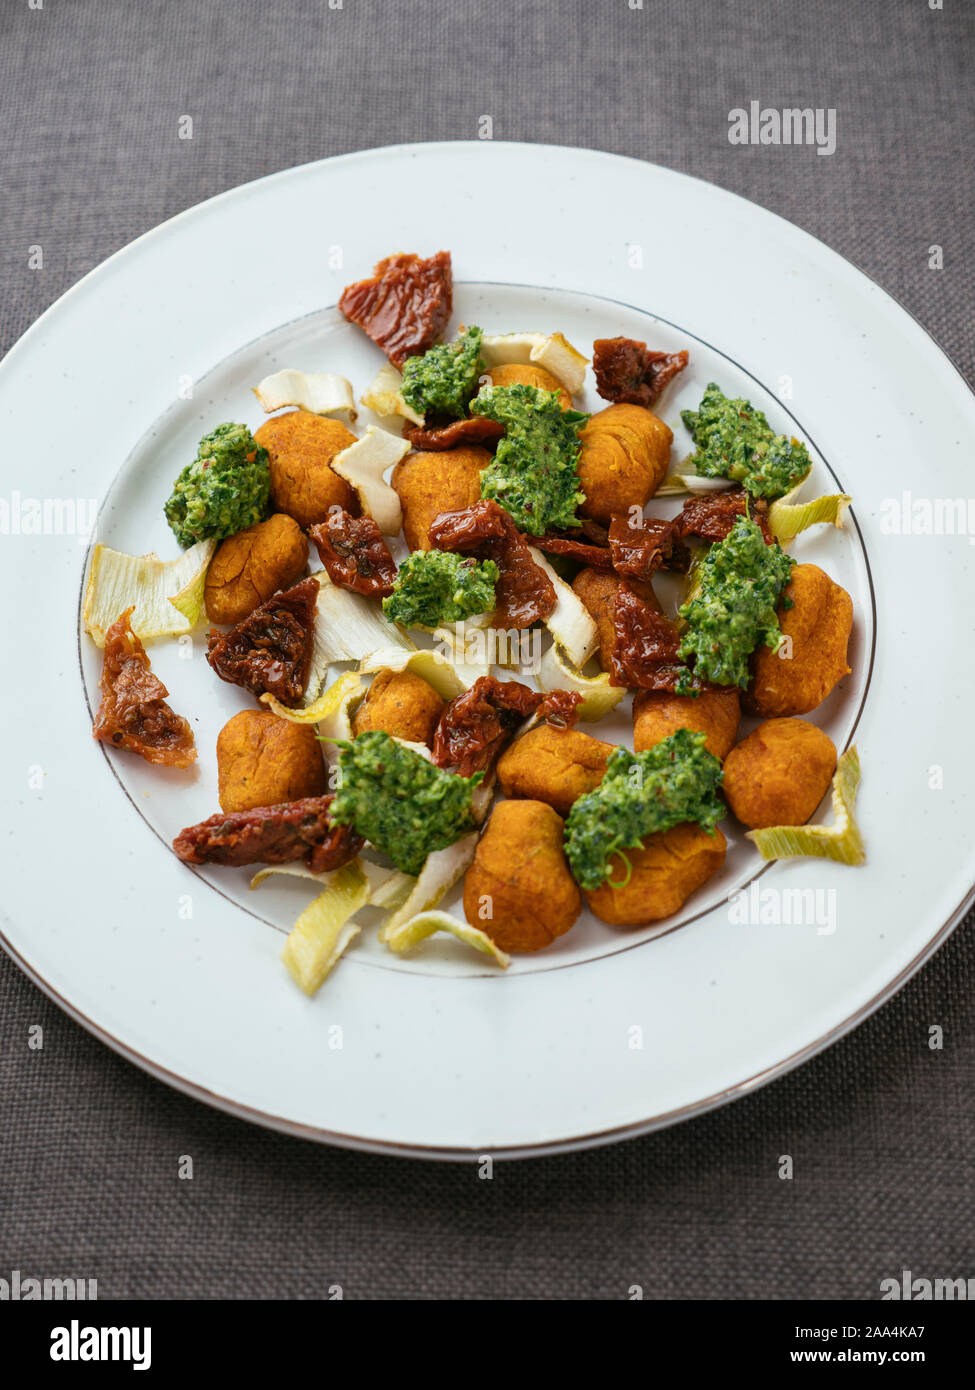 Winter Squash Gnocchi with Roasted Fennel and Spinach Pesto Stock Photo